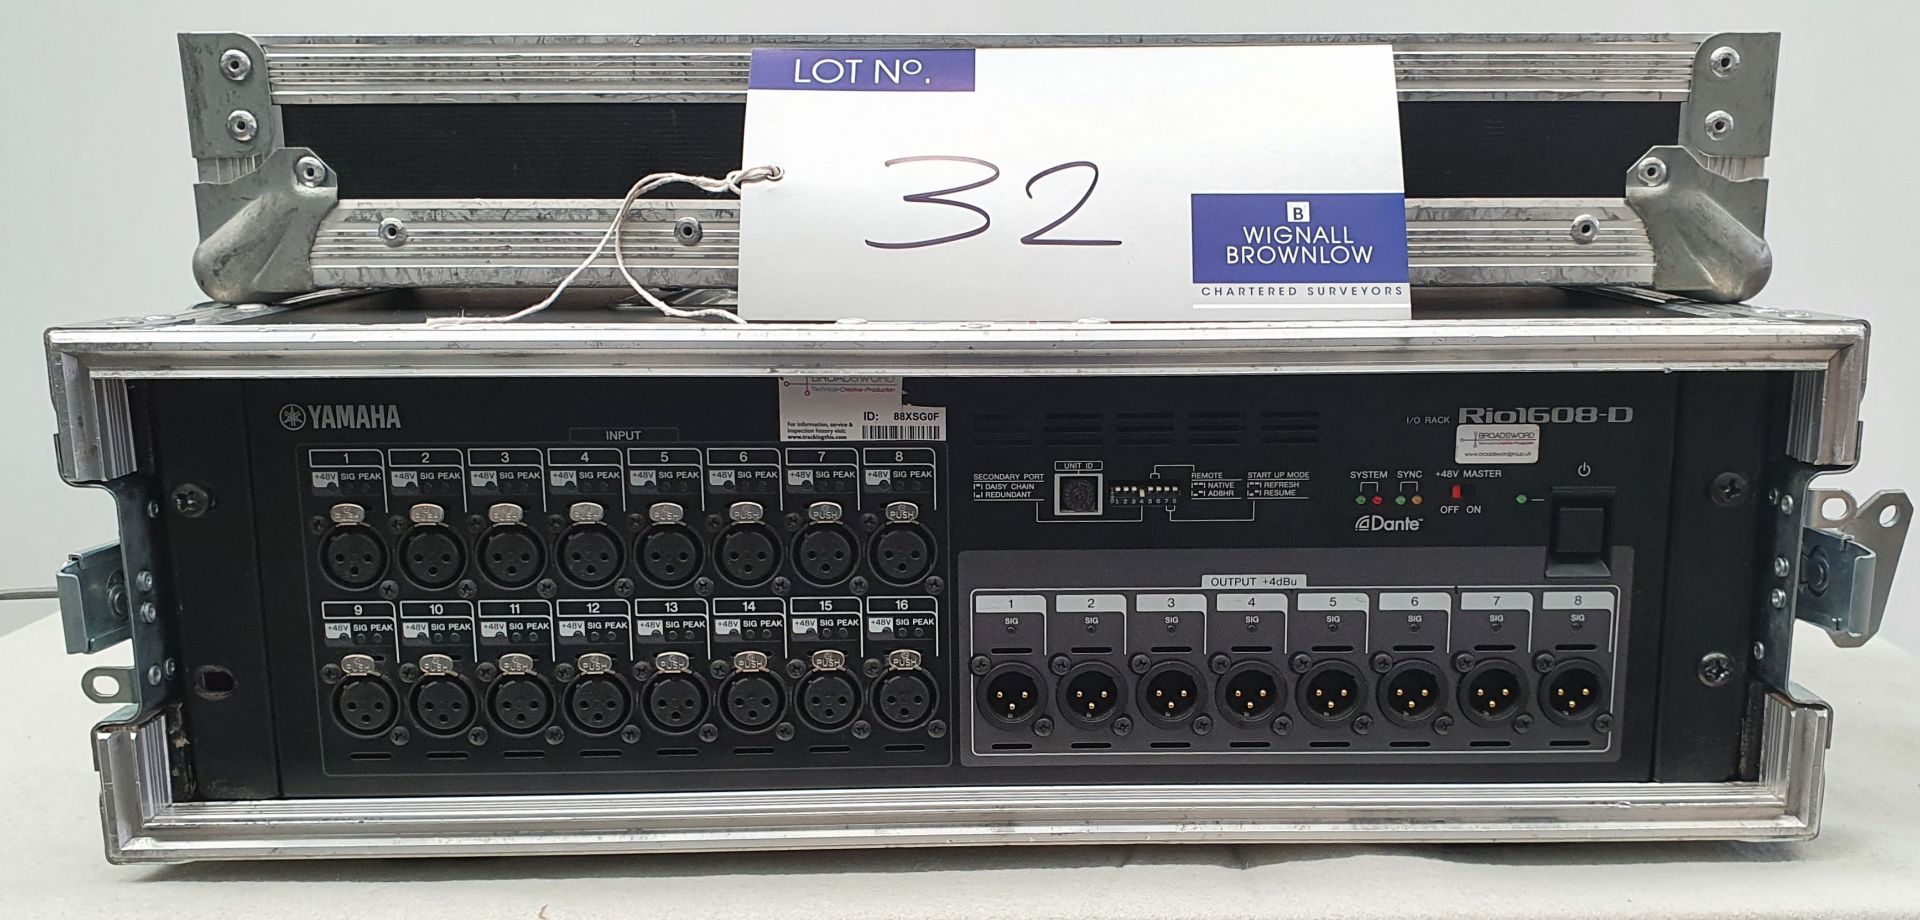 A Yamaha Rio 1608-D Stage Box, 16 Inputs, 8 Outputs No.BAWN01036 with flight case. - Image 2 of 3